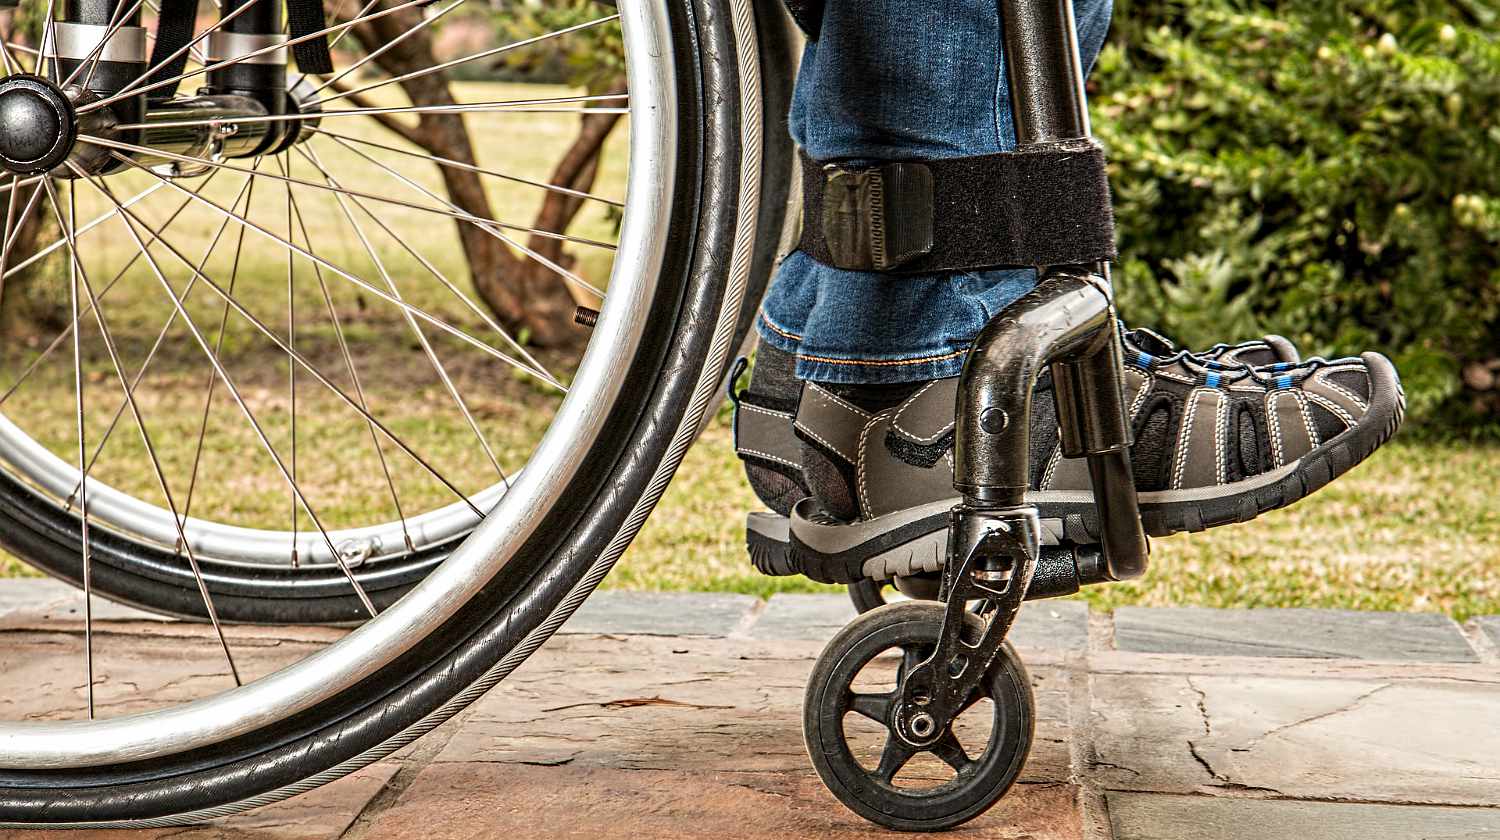 Feature | Handicapped man sitting in a wheelchair | Prepping Tips For The Mobility Challenged